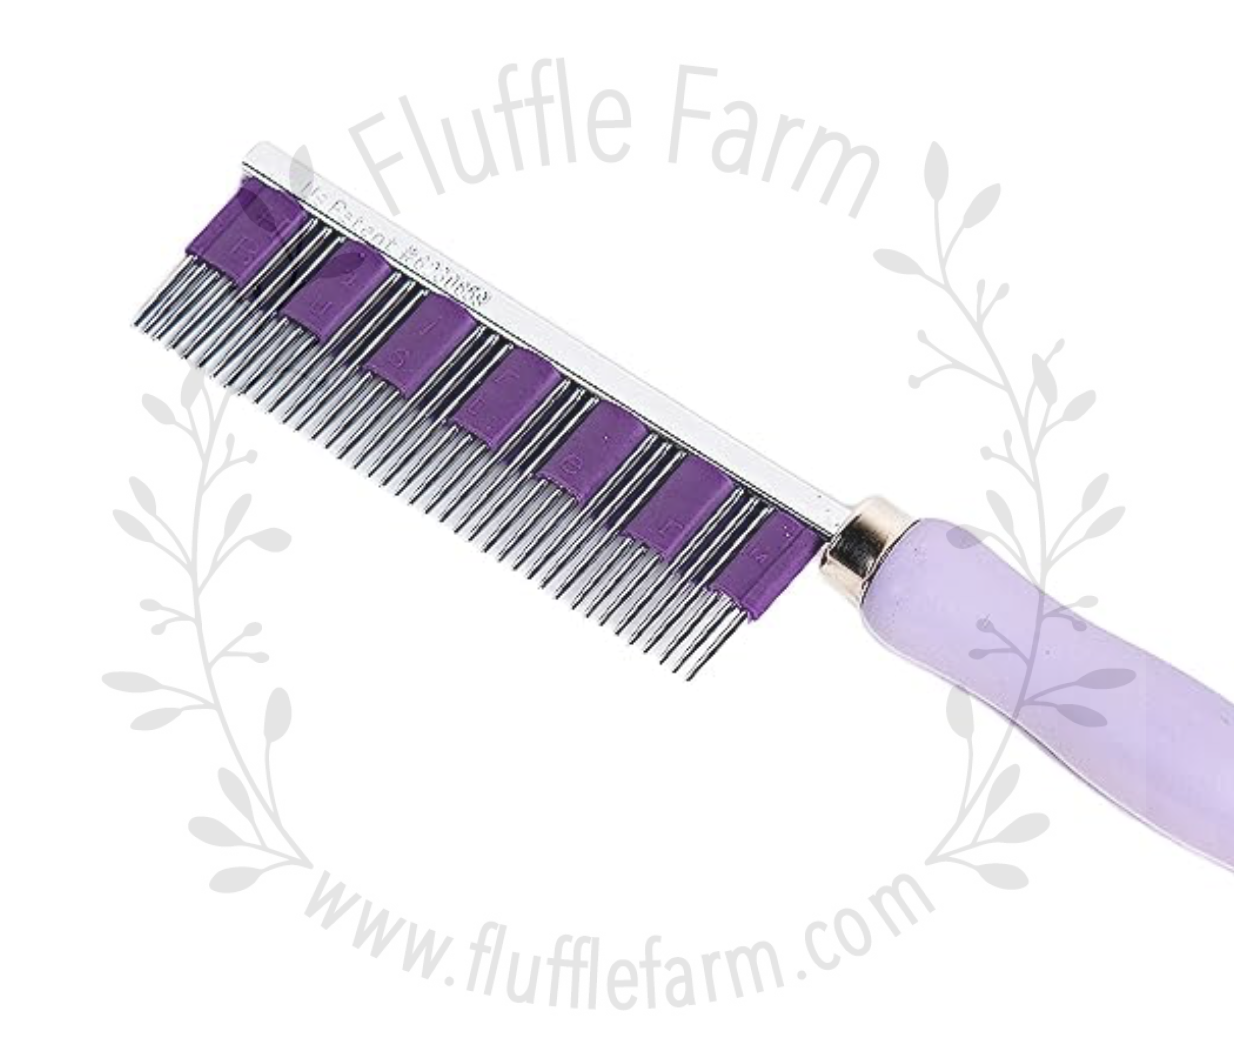 Hair buster the recommended brush for rabbits from Fluffle Farm